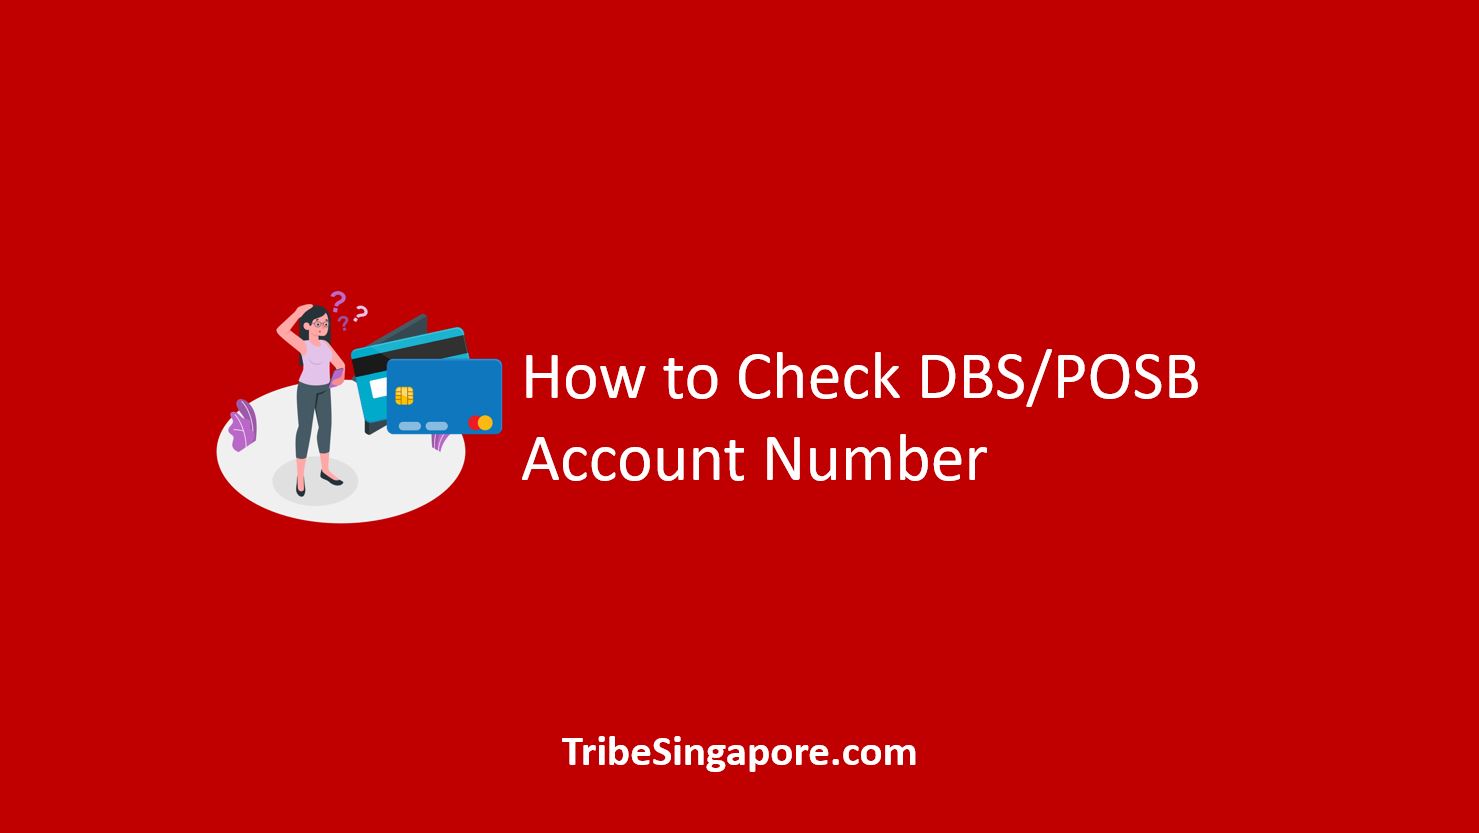 How to Check DBS/POSB Account Number